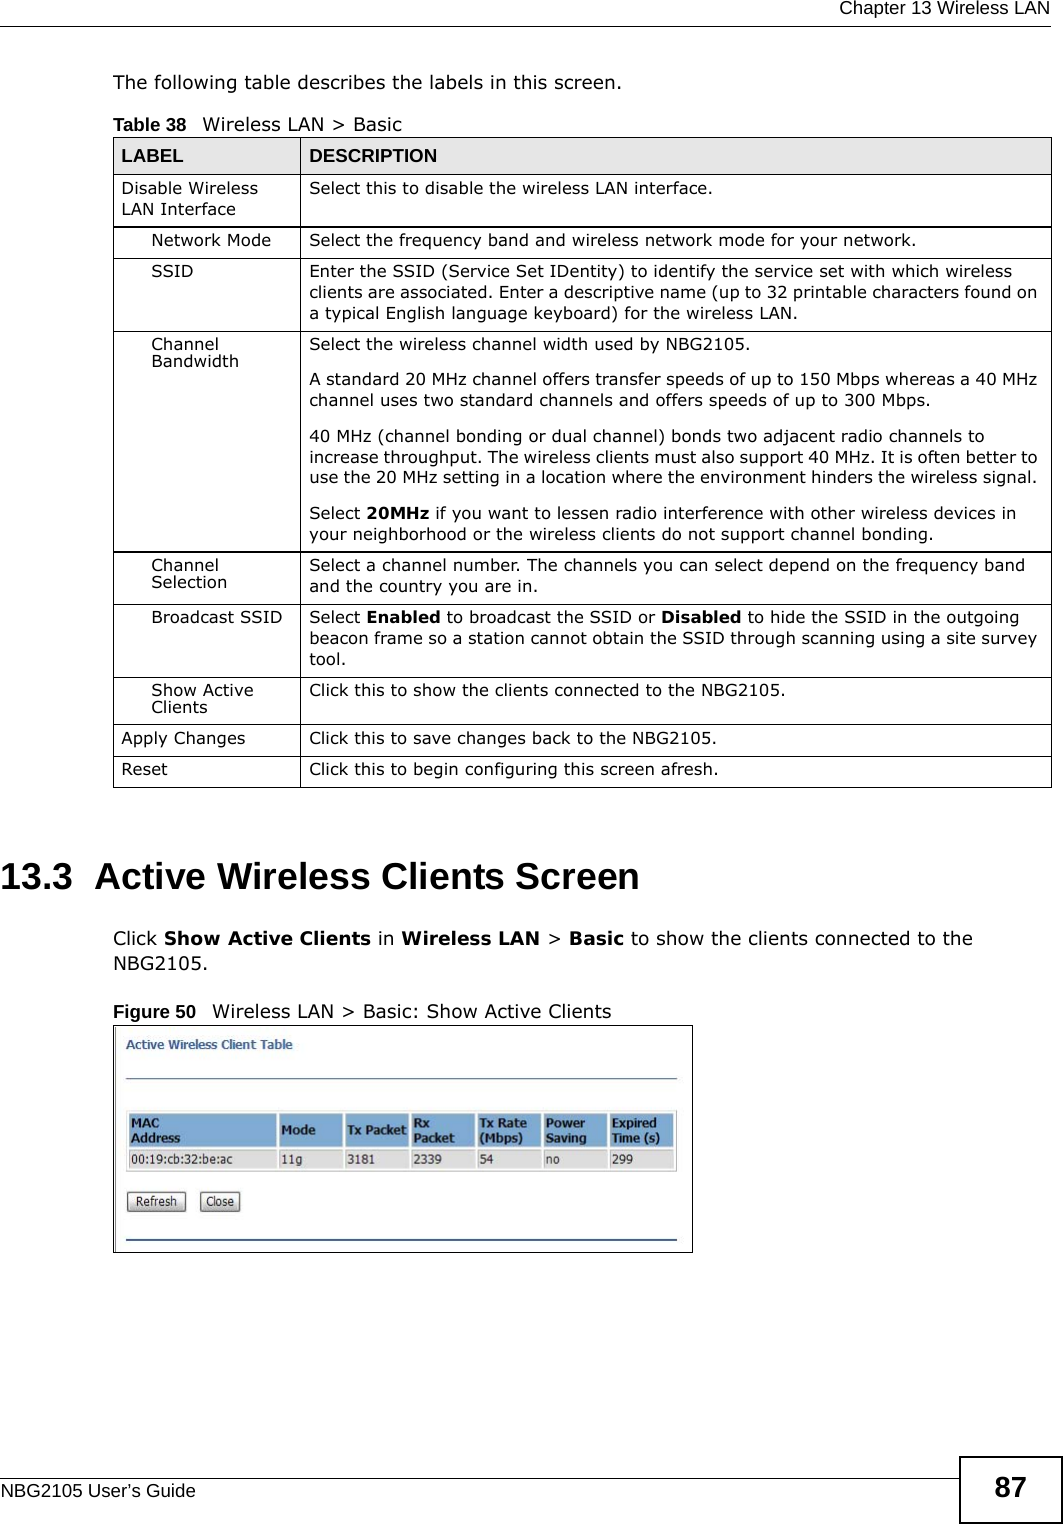  Chapter 13 Wireless LANNBG2105 User’s Guide 87The following table describes the labels in this screen.13.3  Active Wireless Clients ScreenClick Show Active Clients in Wireless LAN &gt; Basic to show the clients connected to the NBG2105.Figure 50   Wireless LAN &gt; Basic: Show Active Clients Table 38   Wireless LAN &gt; BasicLABEL DESCRIPTIONDisable Wireless LAN InterfaceSelect this to disable the wireless LAN interface.Network Mode Select the frequency band and wireless network mode for your network.SSID Enter the SSID (Service Set IDentity) to identify the service set with which wireless clients are associated. Enter a descriptive name (up to 32 printable characters found on a typical English language keyboard) for the wireless LAN. Channel Bandwidth Select the wireless channel width used by NBG2105.A standard 20 MHz channel offers transfer speeds of up to 150 Mbps whereas a 40 MHz channel uses two standard channels and offers speeds of up to 300 Mbps. 40 MHz (channel bonding or dual channel) bonds two adjacent radio channels to increase throughput. The wireless clients must also support 40 MHz. It is often better to use the 20 MHz setting in a location where the environment hinders the wireless signal. Select 20MHz if you want to lessen radio interference with other wireless devices in your neighborhood or the wireless clients do not support channel bonding.Channel Selection Select a channel number. The channels you can select depend on the frequency band and the country you are in.Broadcast SSID Select Enabled to broadcast the SSID or Disabled to hide the SSID in the outgoing beacon frame so a station cannot obtain the SSID through scanning using a site survey tool.Show Active Clients Click this to show the clients connected to the NBG2105.Apply Changes Click this to save changes back to the NBG2105.Reset Click this to begin configuring this screen afresh.